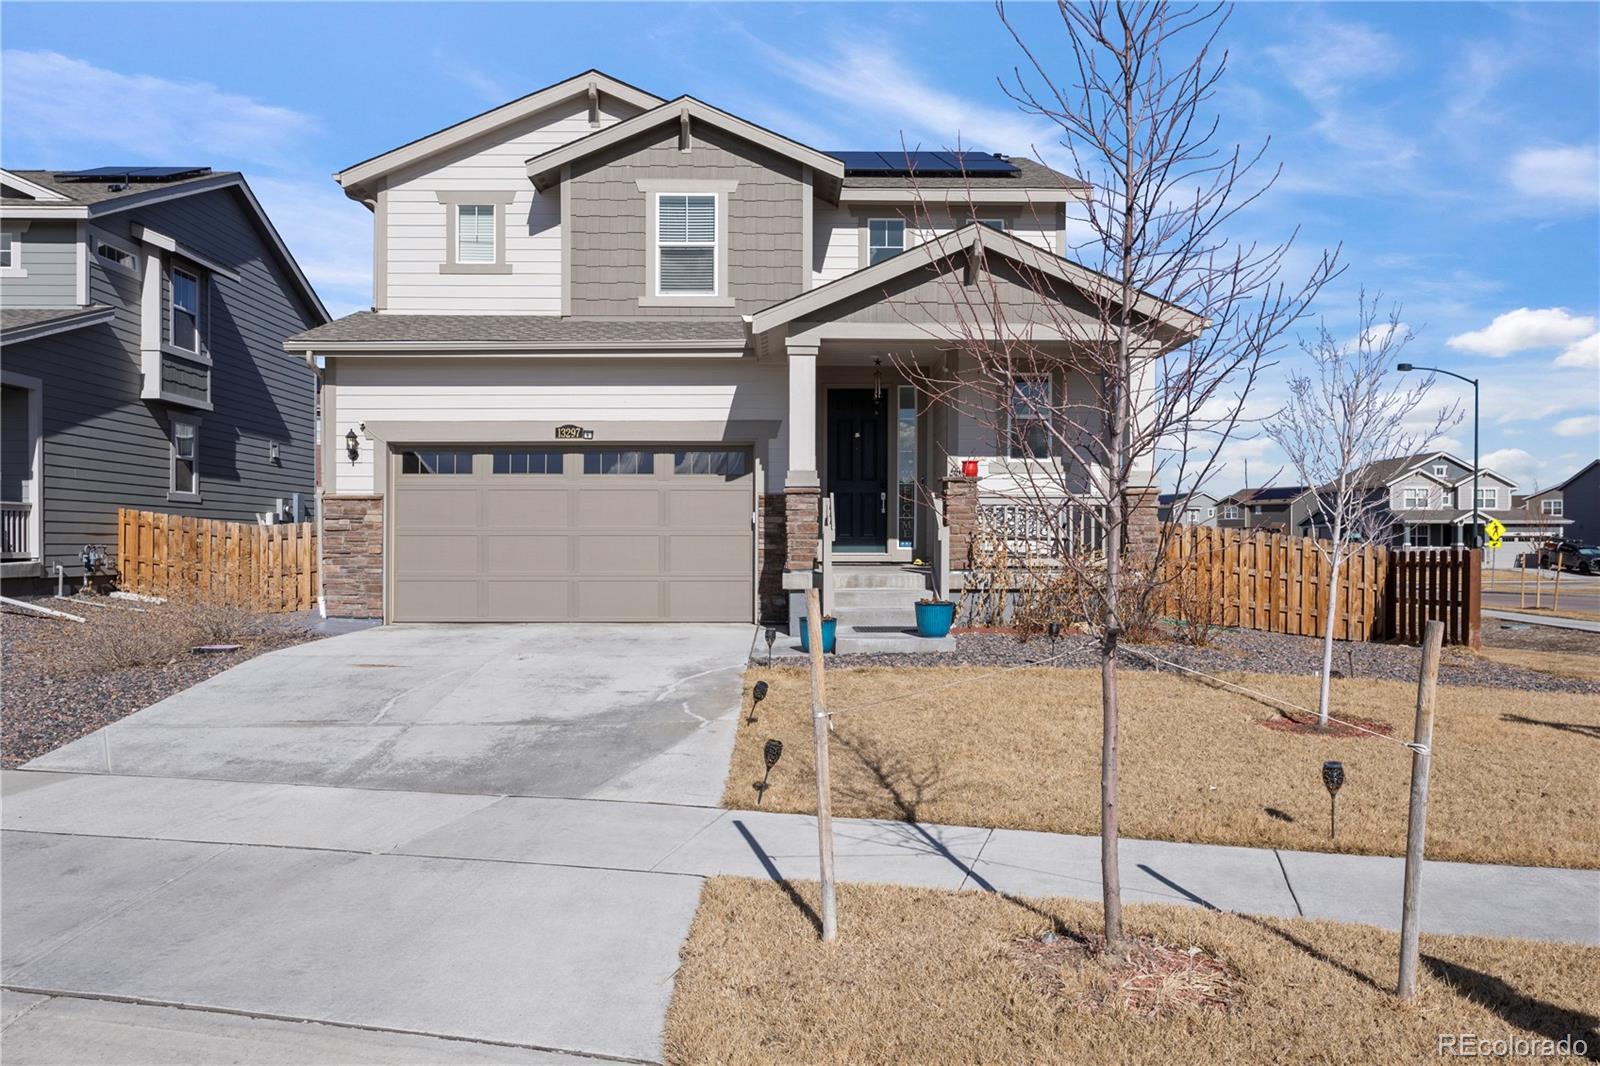 13297 E 109th Way, commerce city MLS: 8198750 Beds: 3 Baths: 3 Price: $563,000